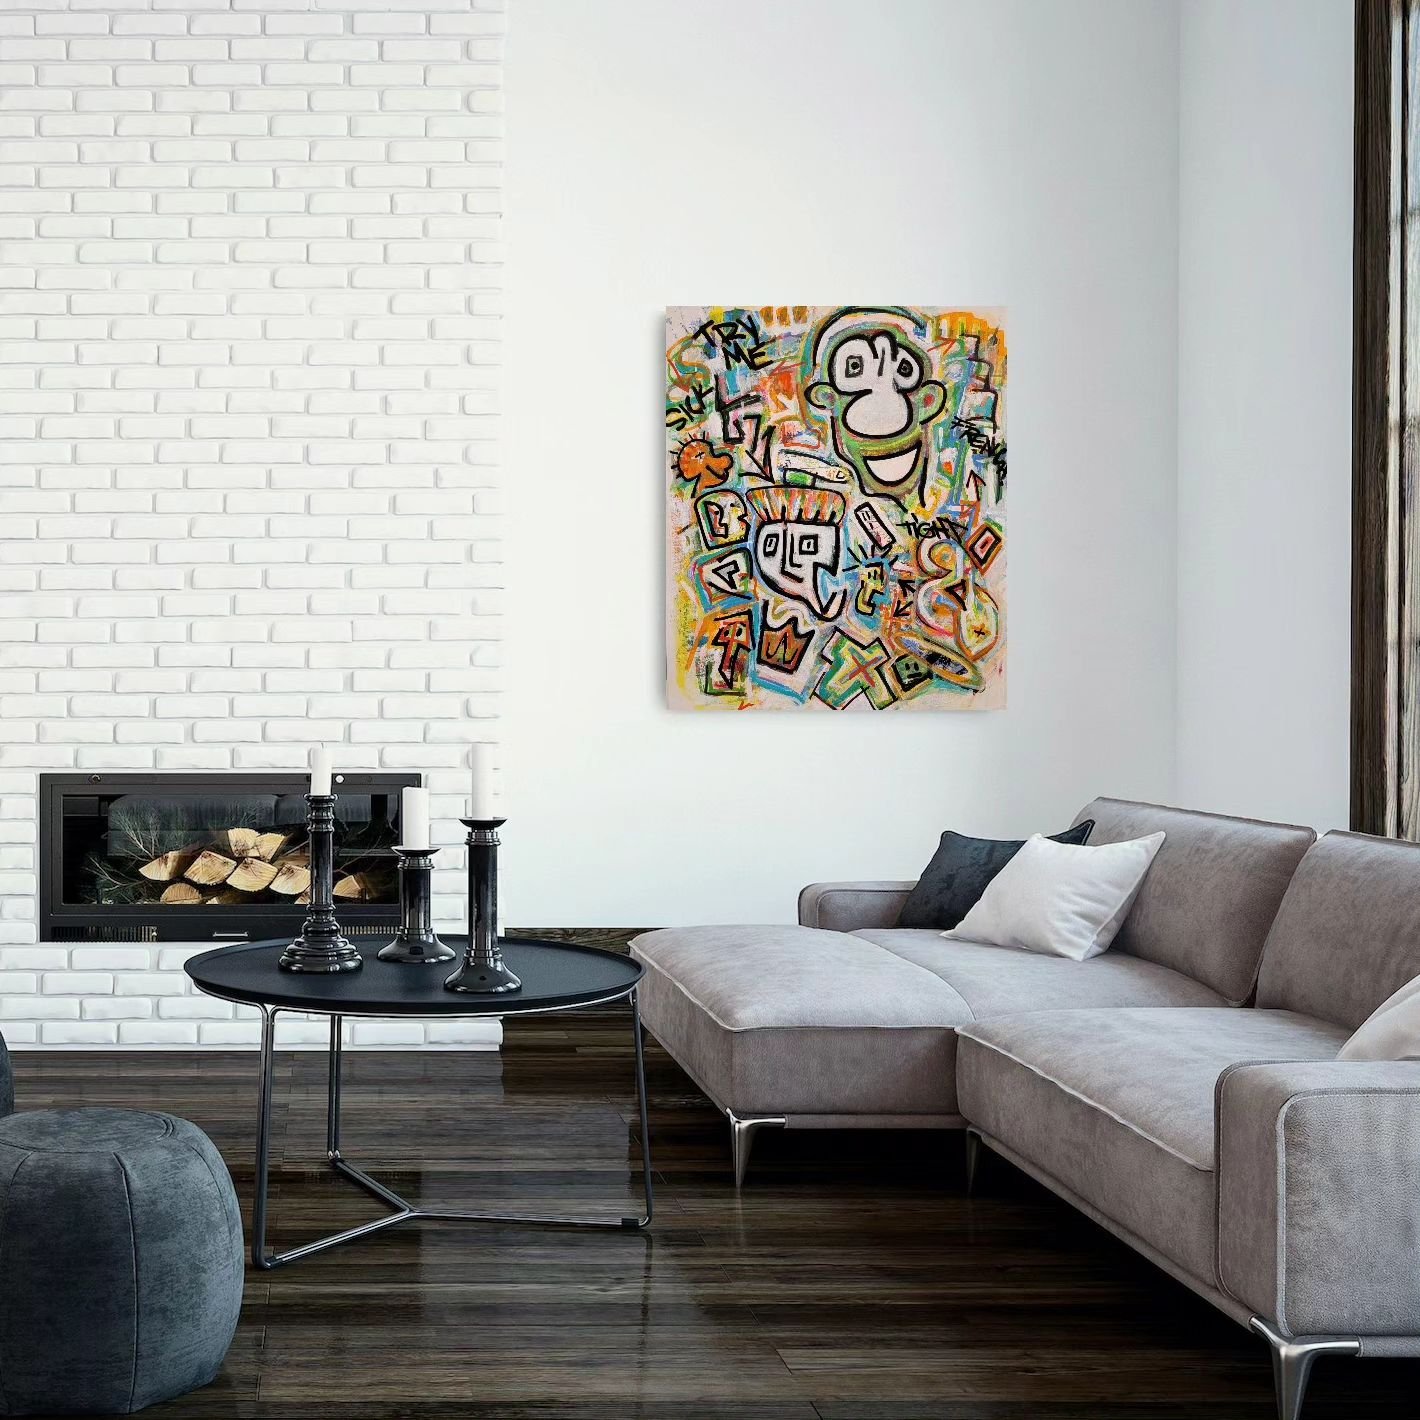 Trying out a new app #artroomsapp 

Don't be scared to add some bold colors to your home.  It makes a statement. 

#art #artistsoninstagram #streetart #acryliconcanvas #loft #homedecor #jasonpikenart #artoftheday #nyc #westchester #artist #basquiat